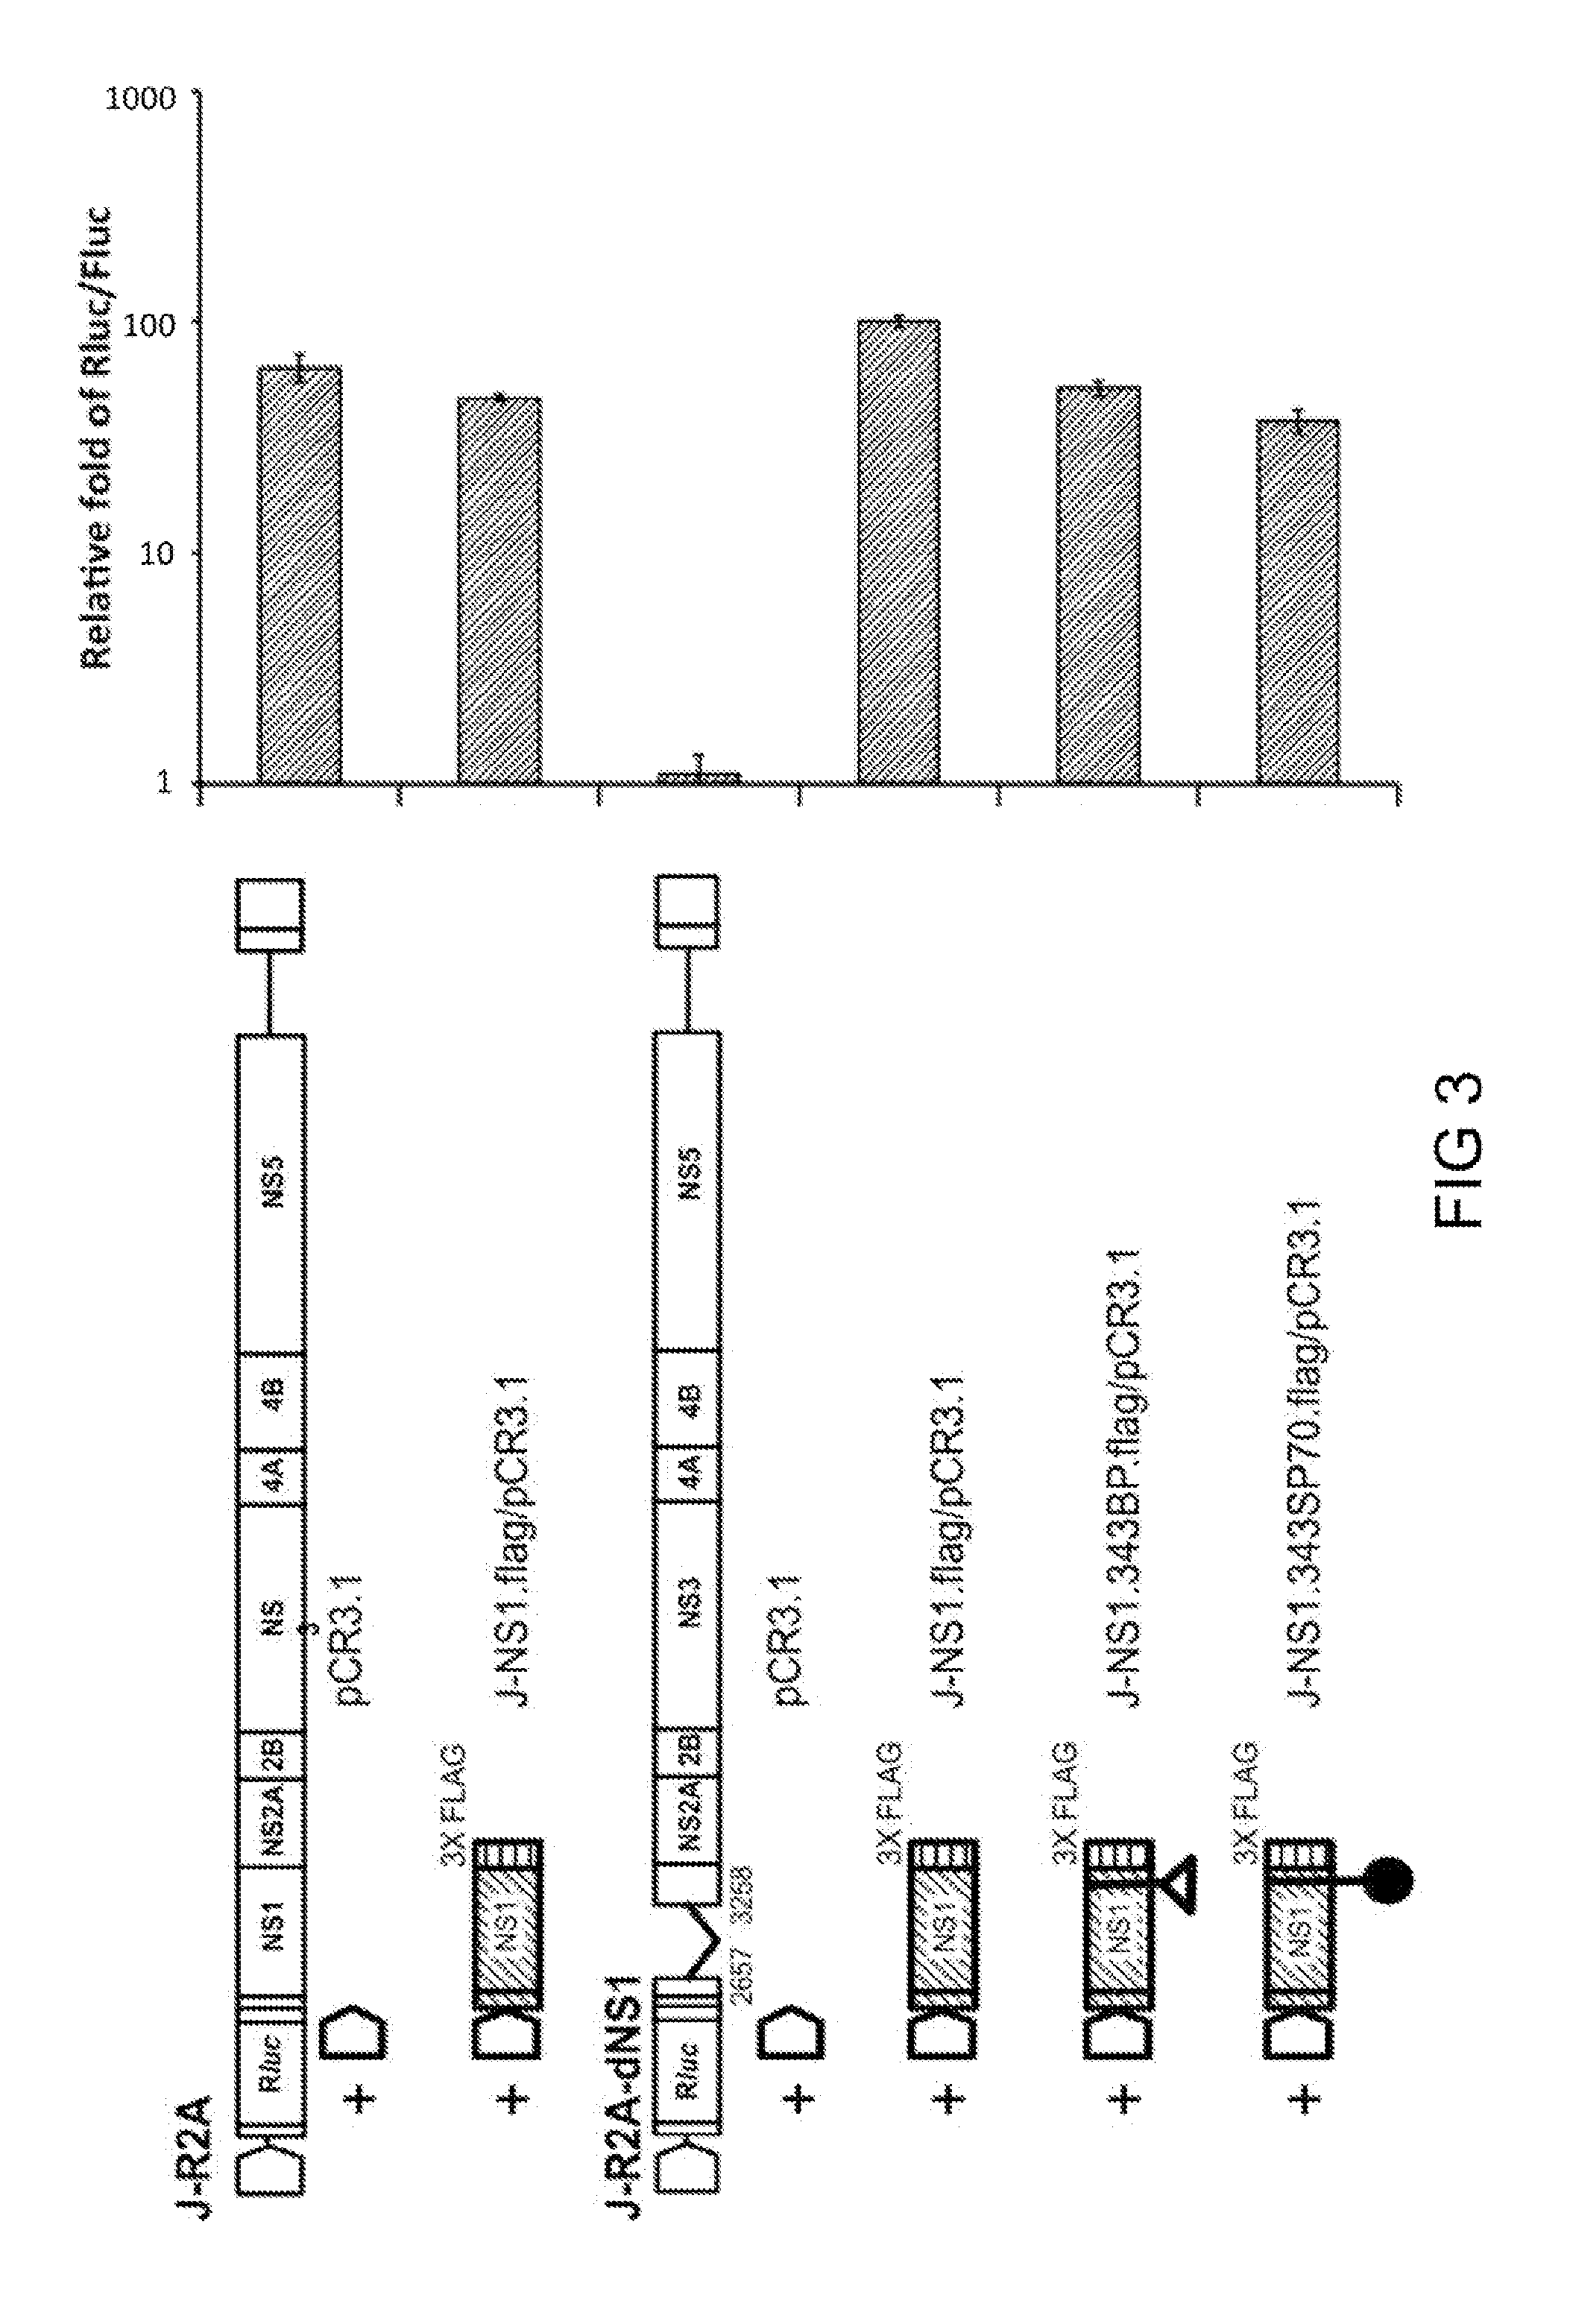 Recombinant flaviviral constructs and uses thereof